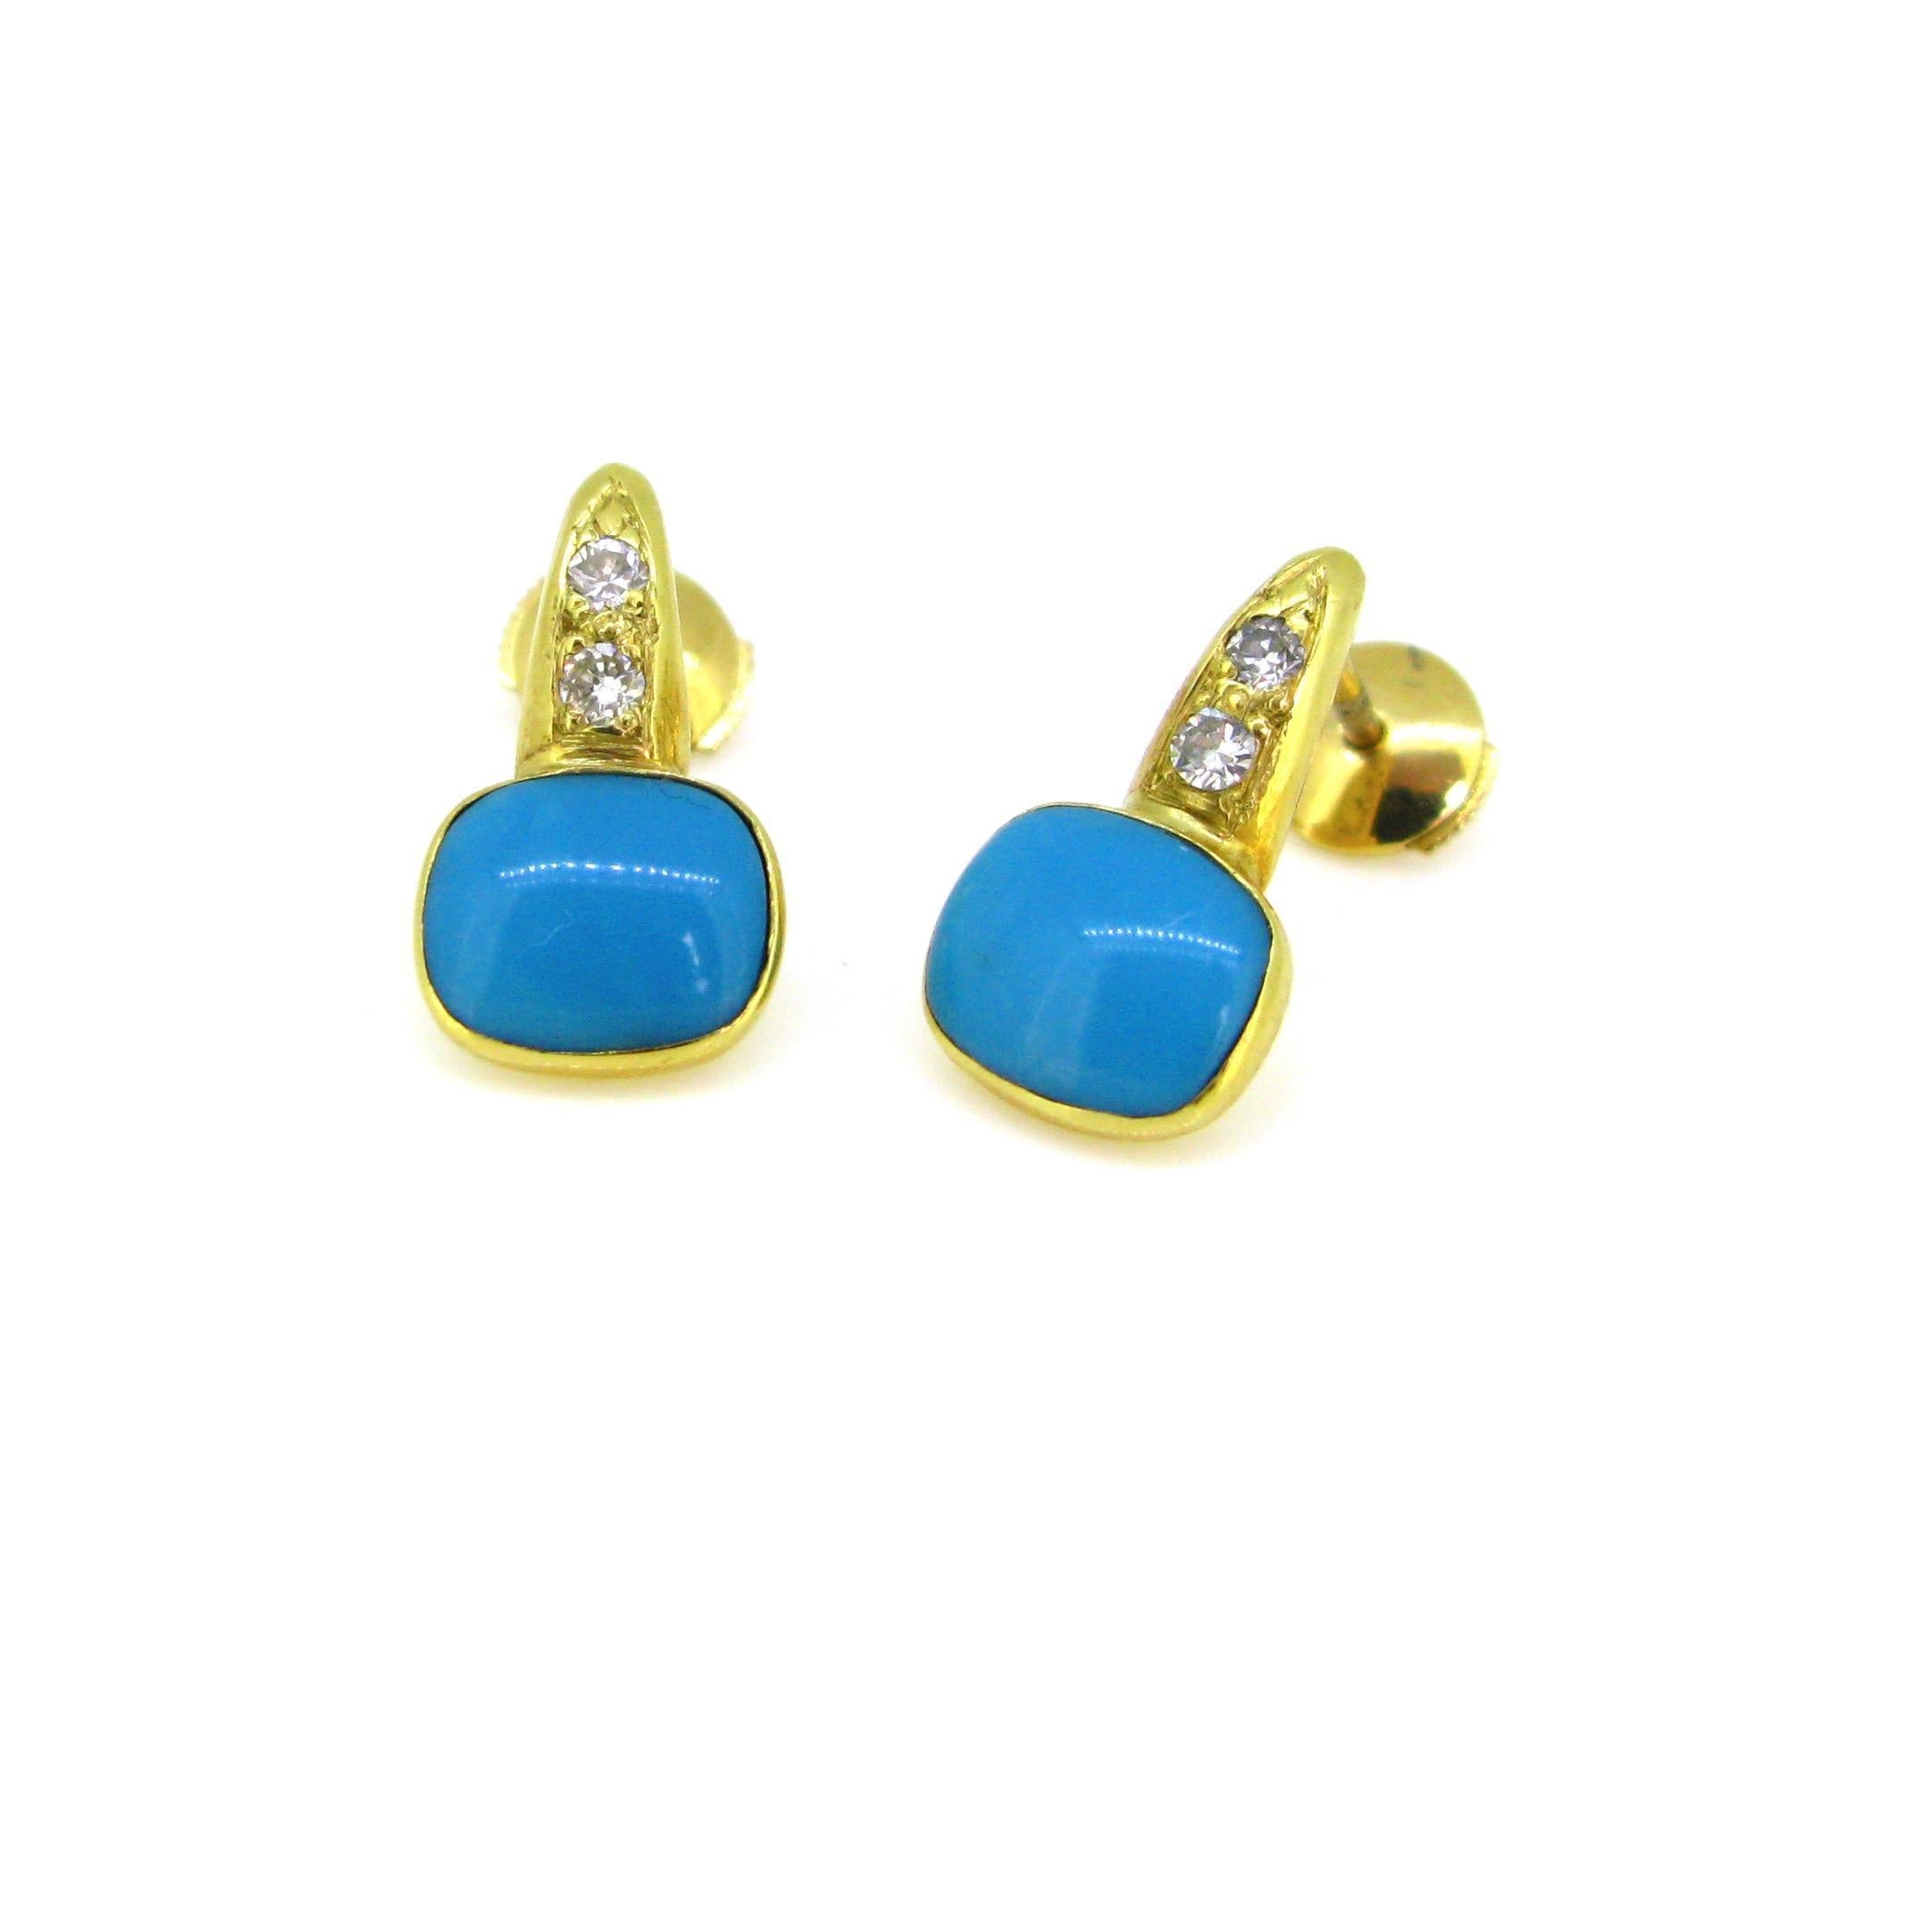 This pair of earrings is made in 18kt yellow gold. The studs are set with a beautiful natural turquoise. It has been tested as a natural turquoise. The blue-sky color gemstone is enhanced with 2 single cut diamonds. 

Weight: 5.3gr

Metal:	18kt